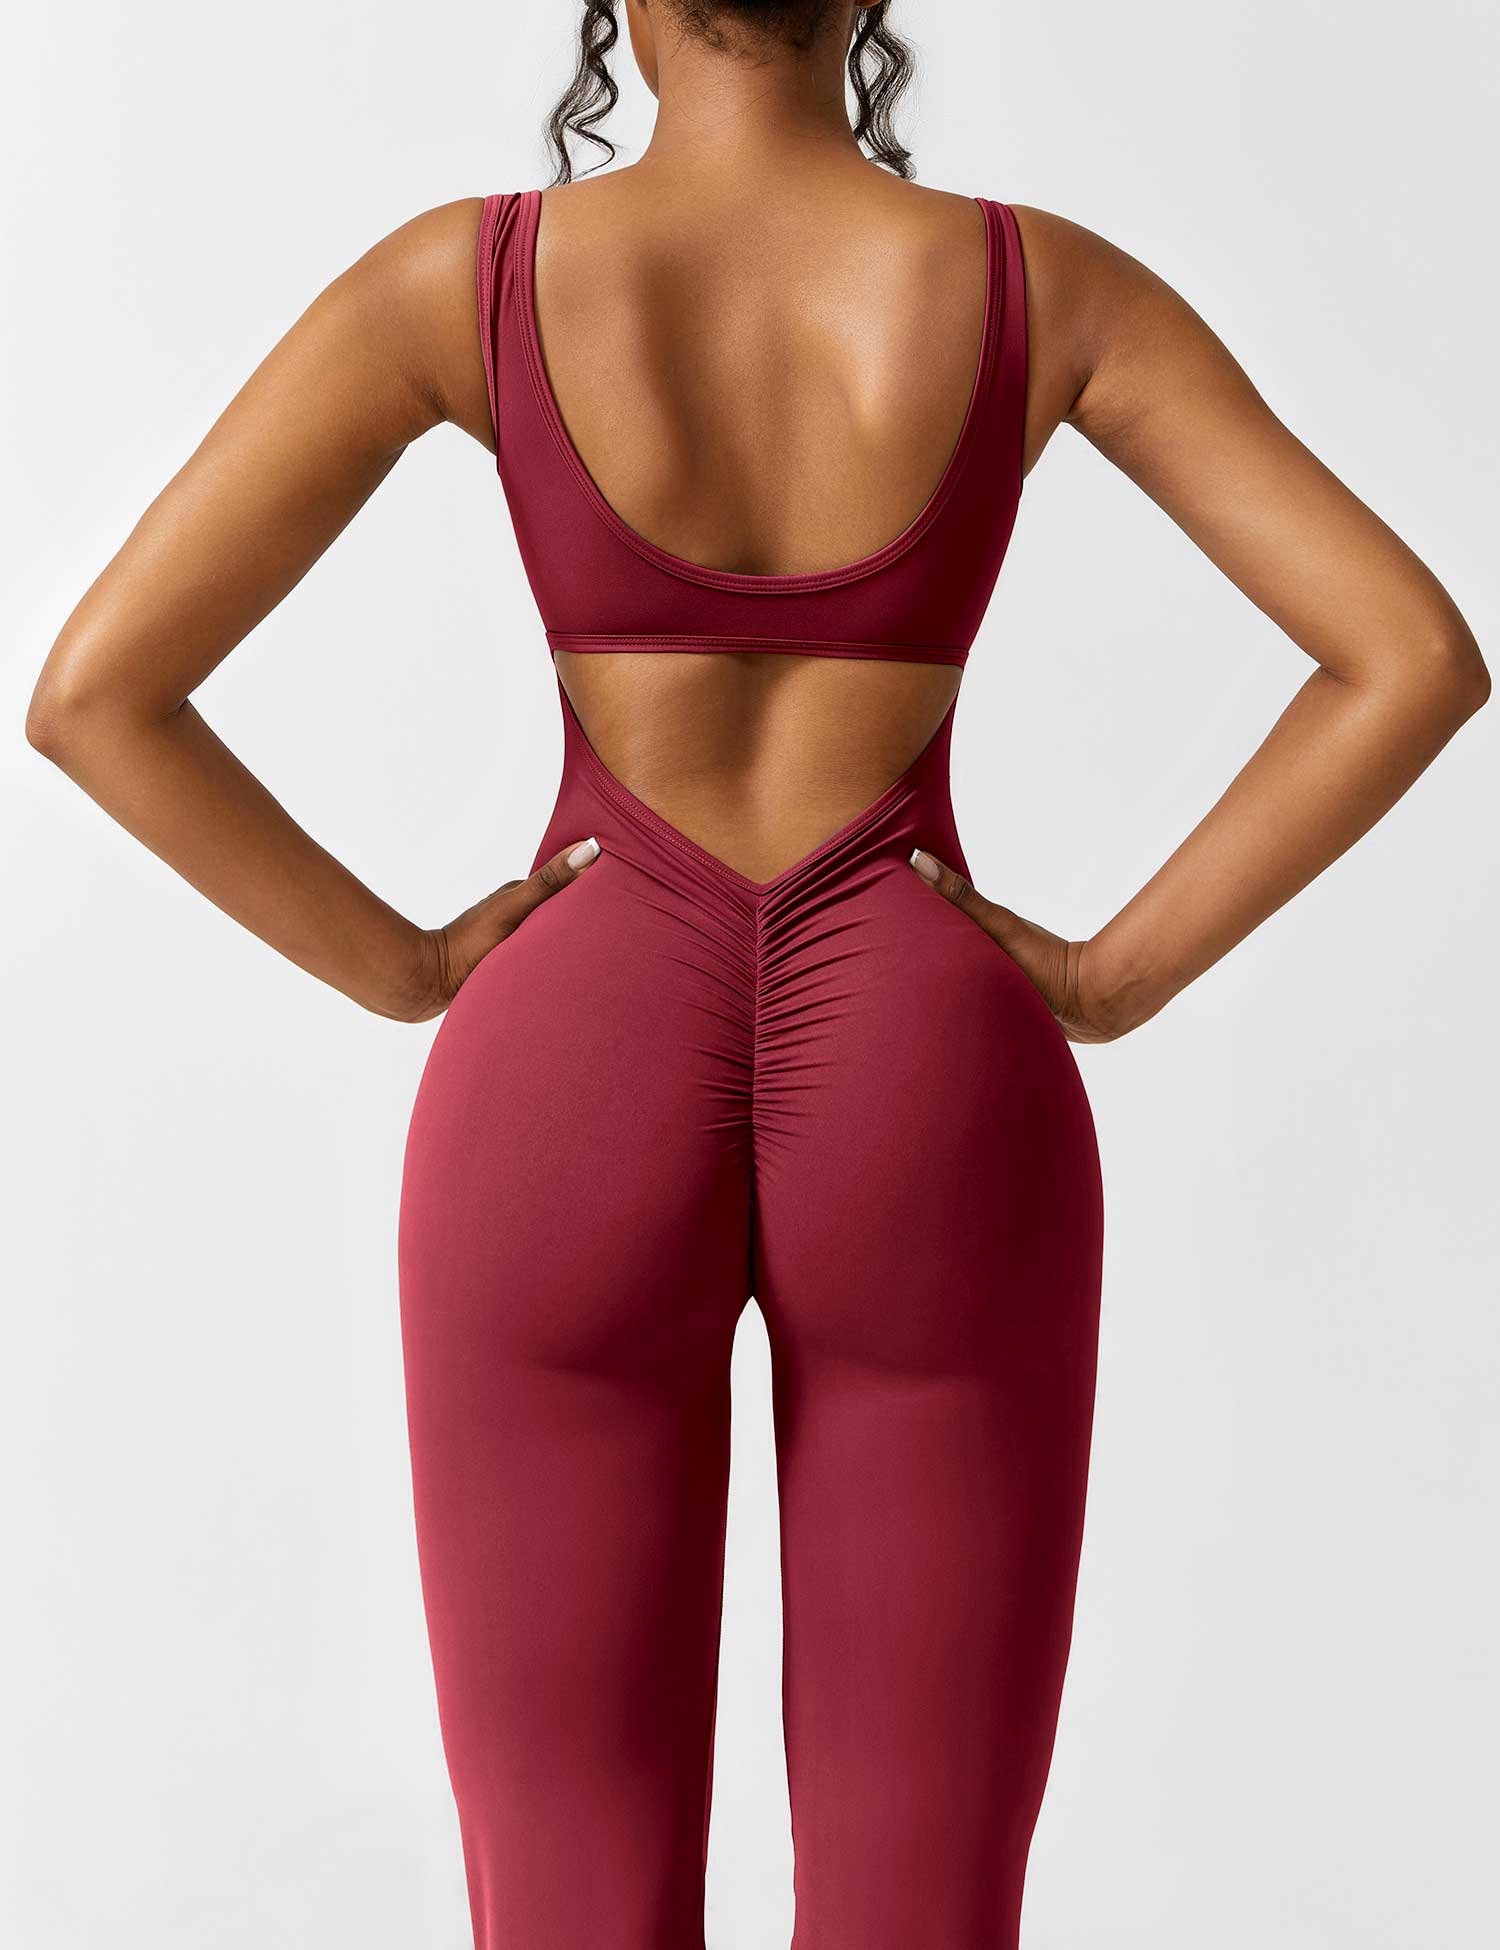 YEOREO Women Yoga Outfits Seamless 2 Piece Suits Nigeria